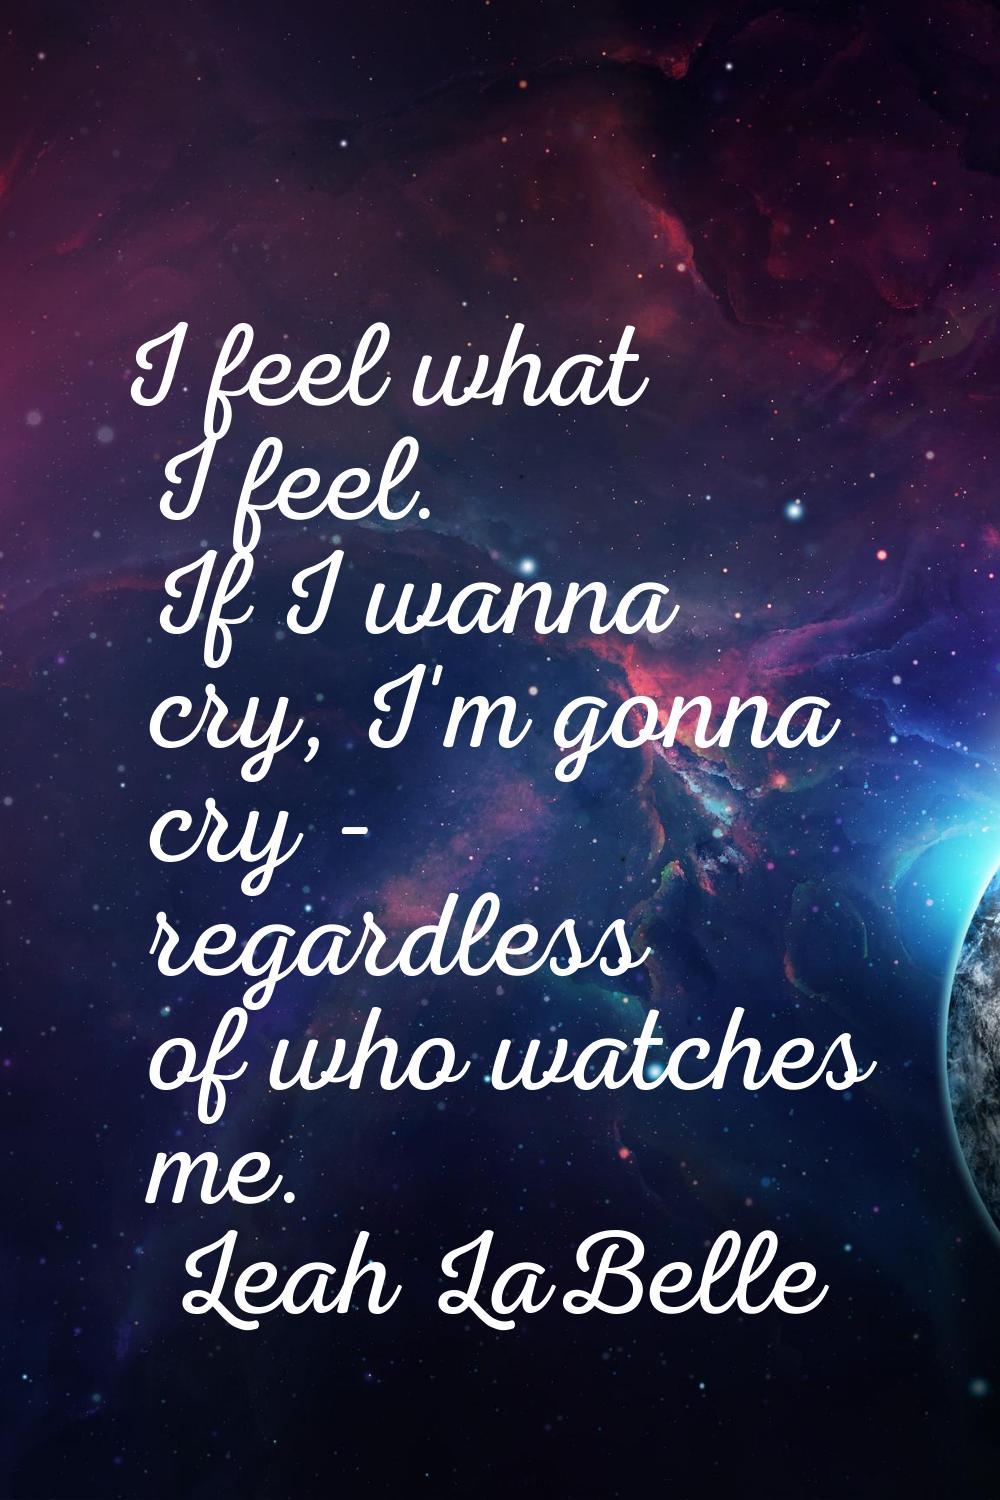 I feel what I feel. If I wanna cry, I'm gonna cry - regardless of who watches me.